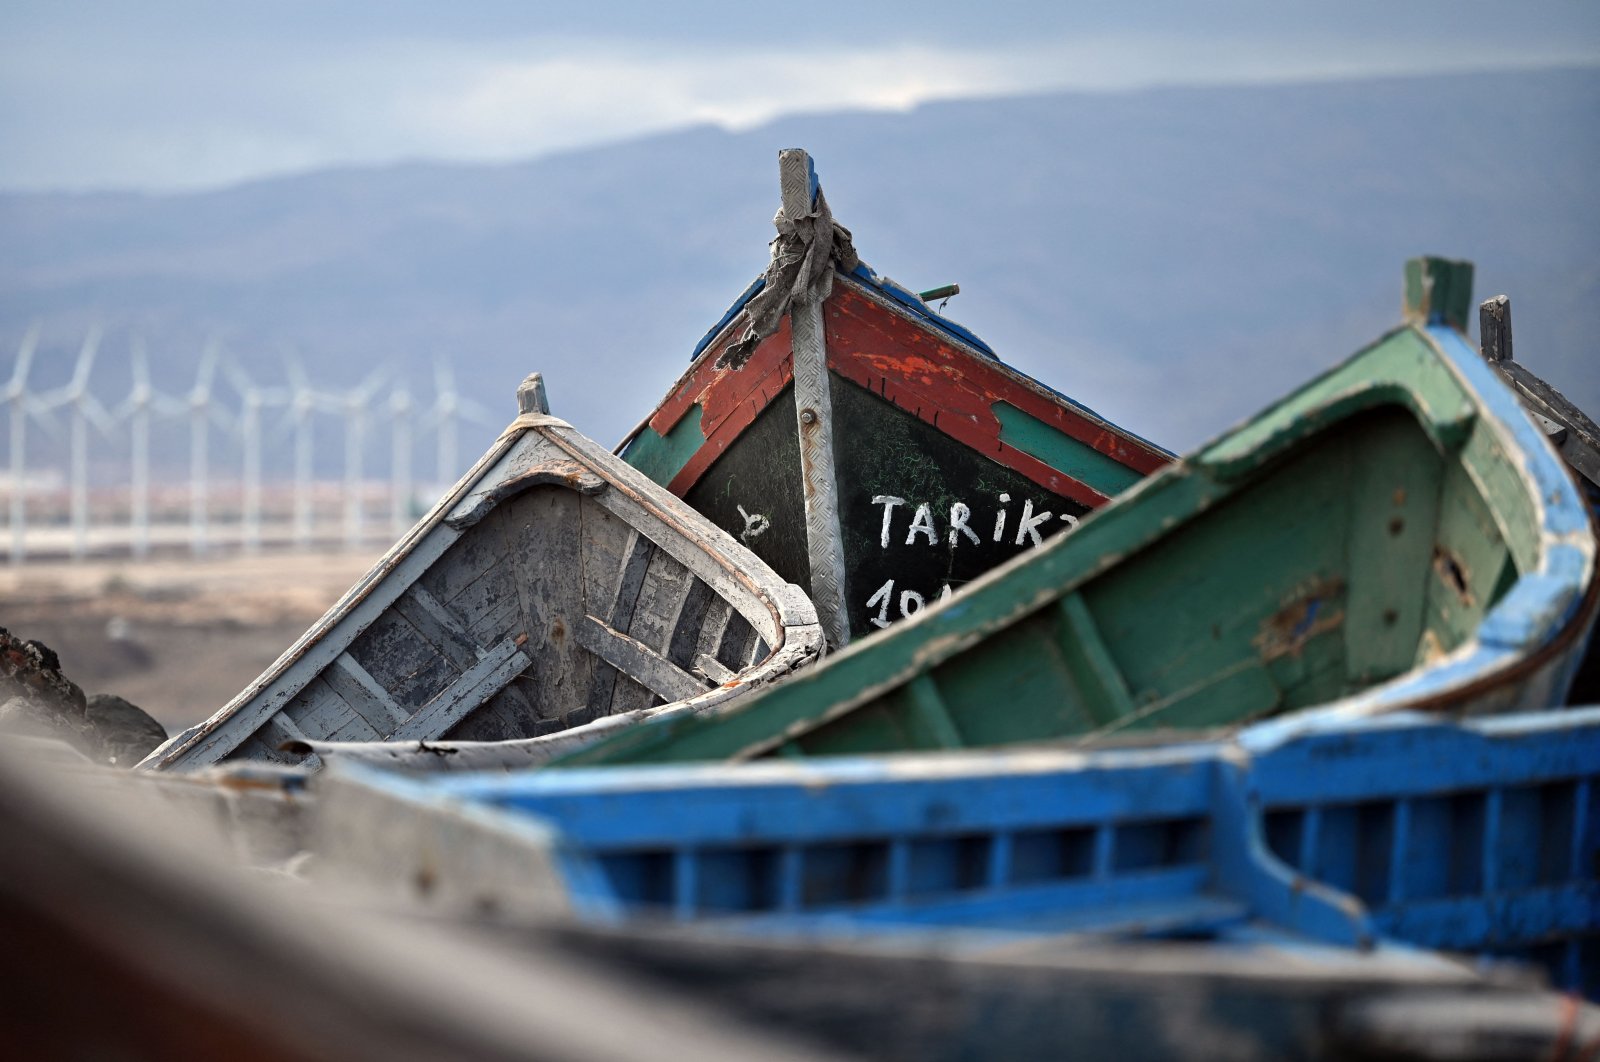 Vessels accumulate at a "boat cemetery" in Arinaga on the island of Gran Canaria, Spain, Nov. 18, 2021. (AFP Photo)